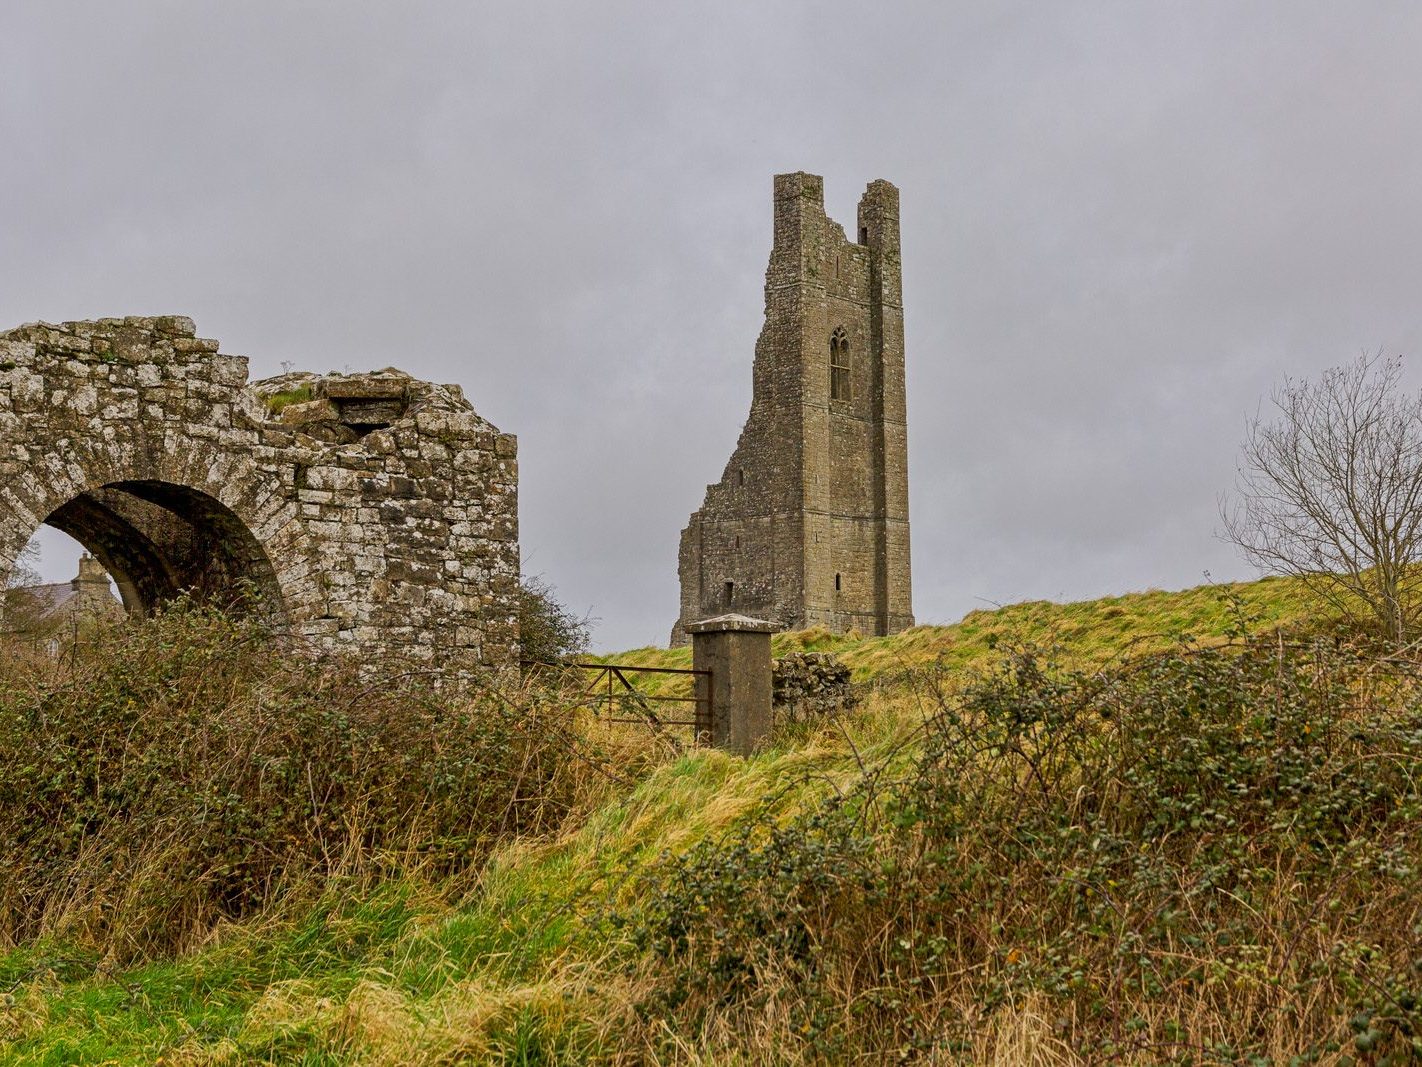 THE YELLOW STEEPLE DOMINATES THE TOWN OF TRIM [ALSO KNOWN AS ST MARYS ABBEY]-226739-1